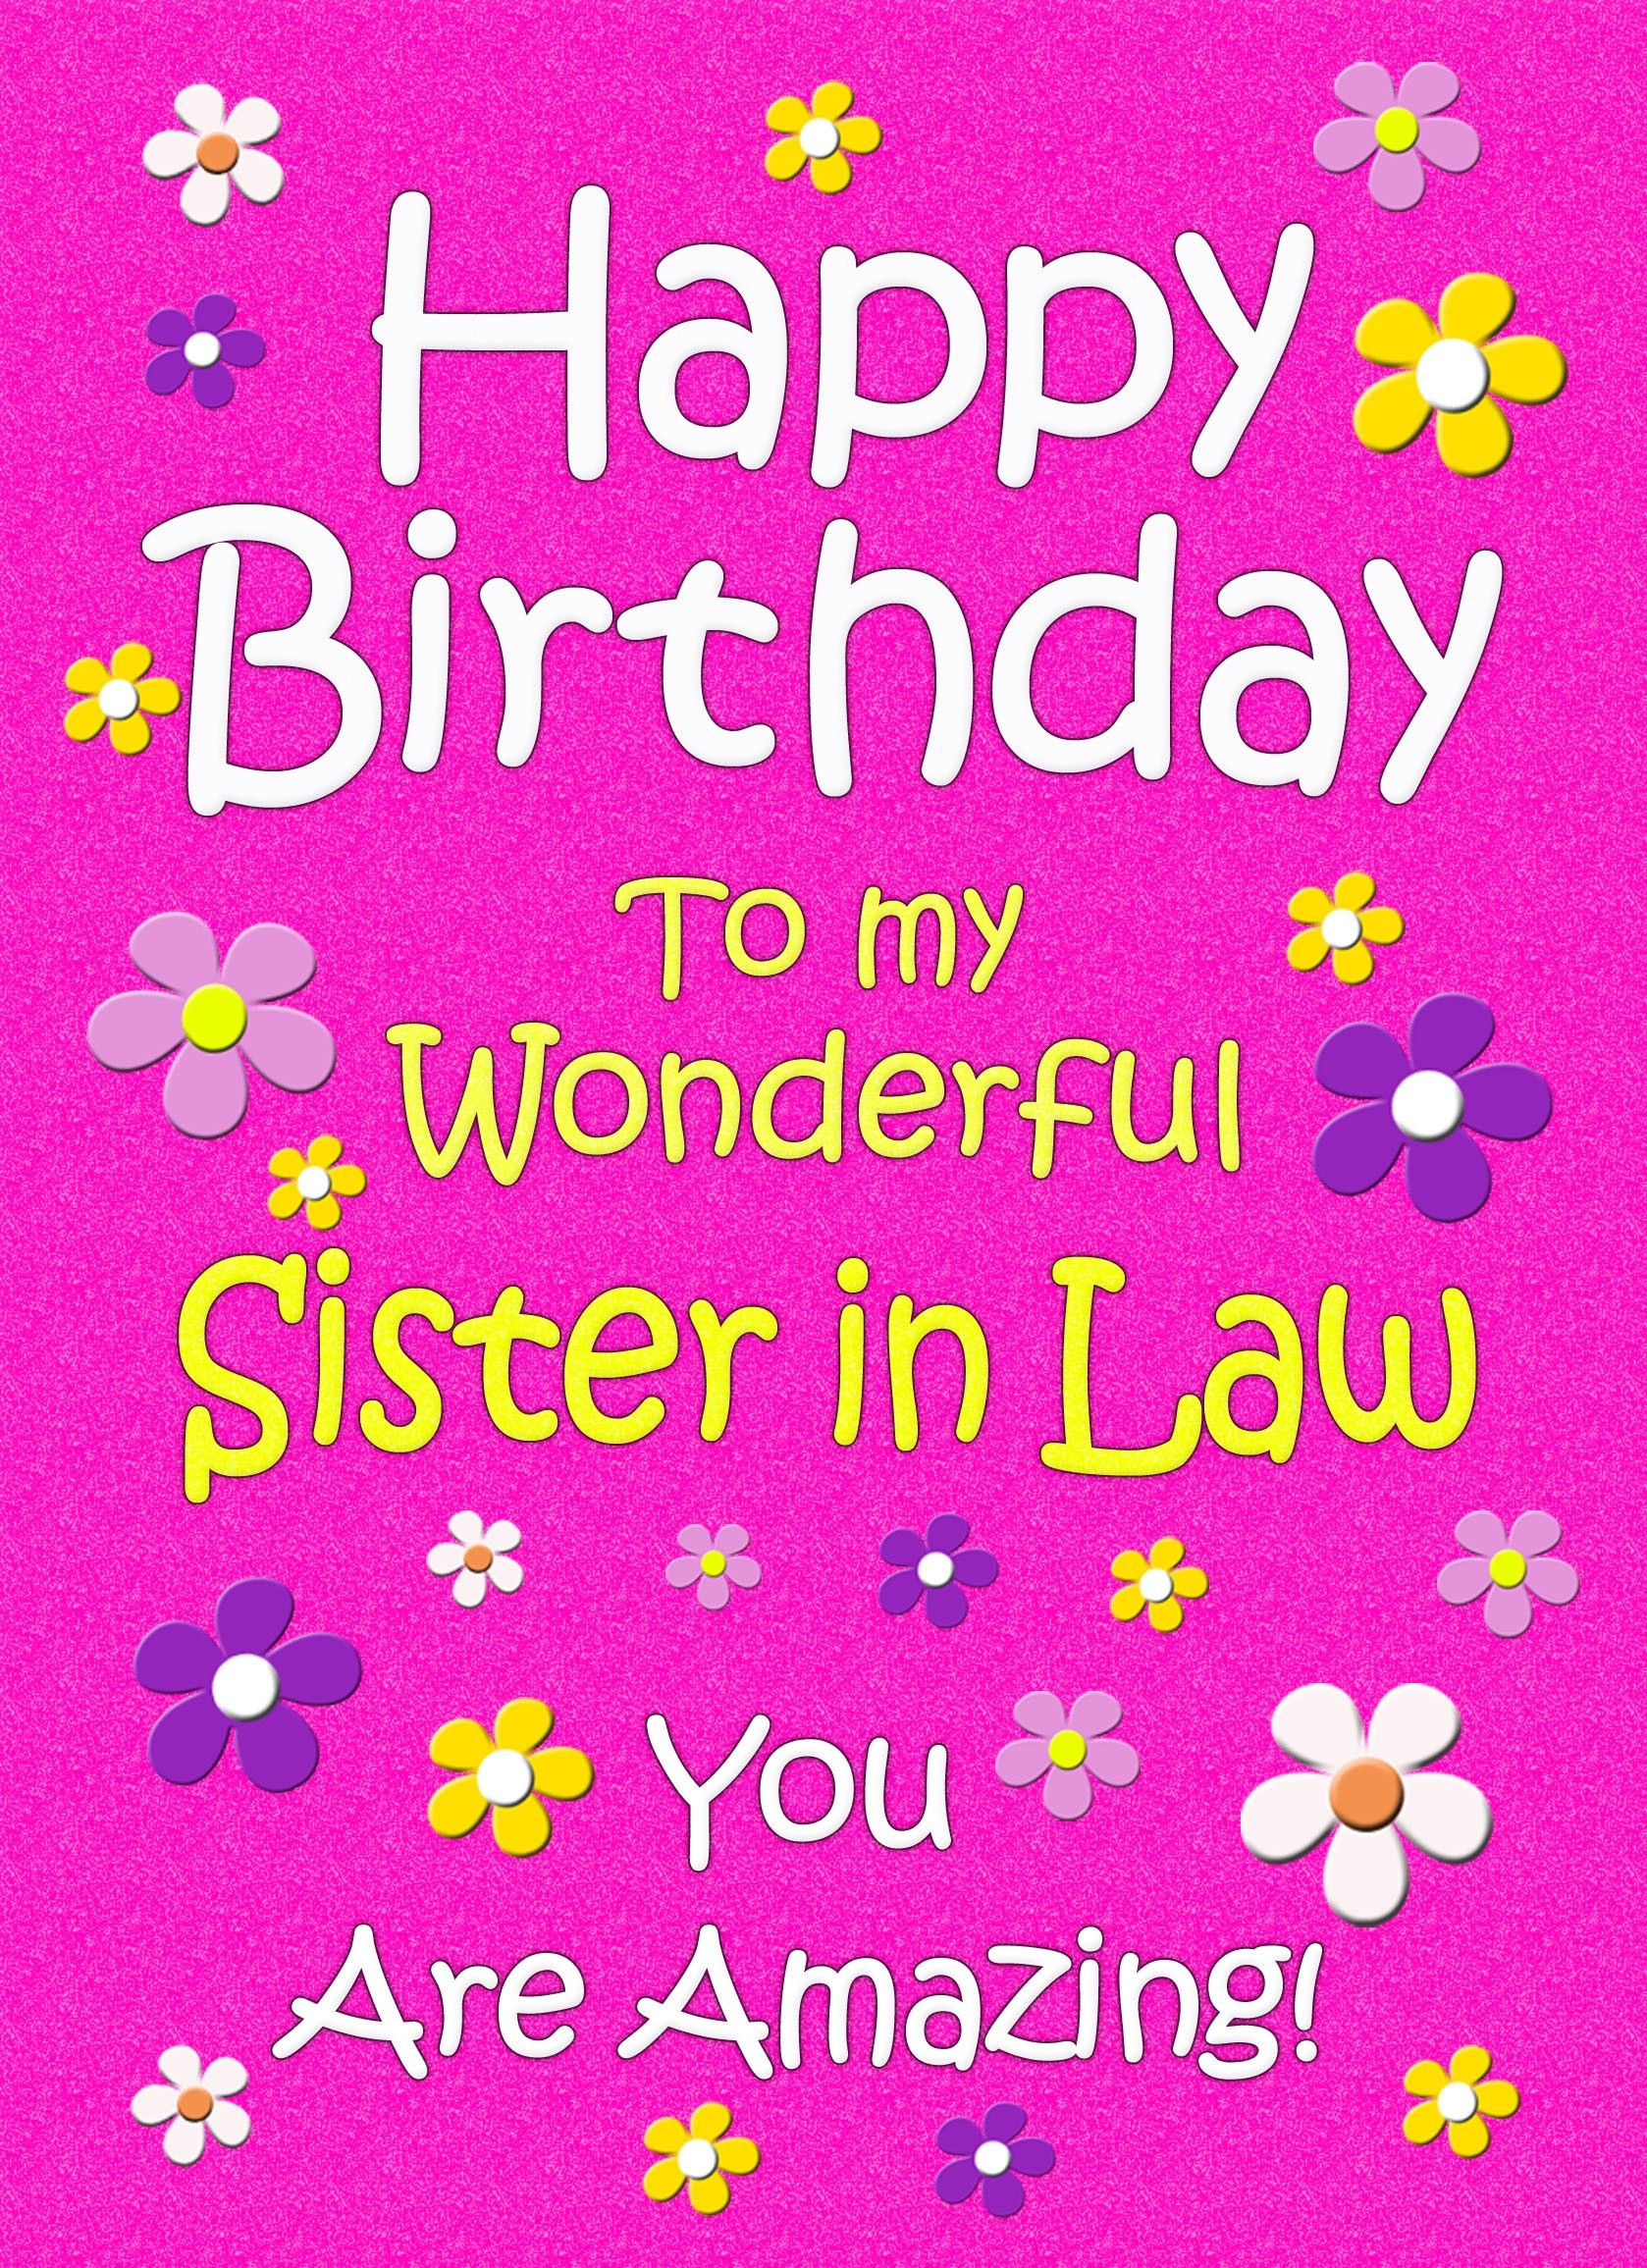 Sister in Law Birthday Card (Cerise)